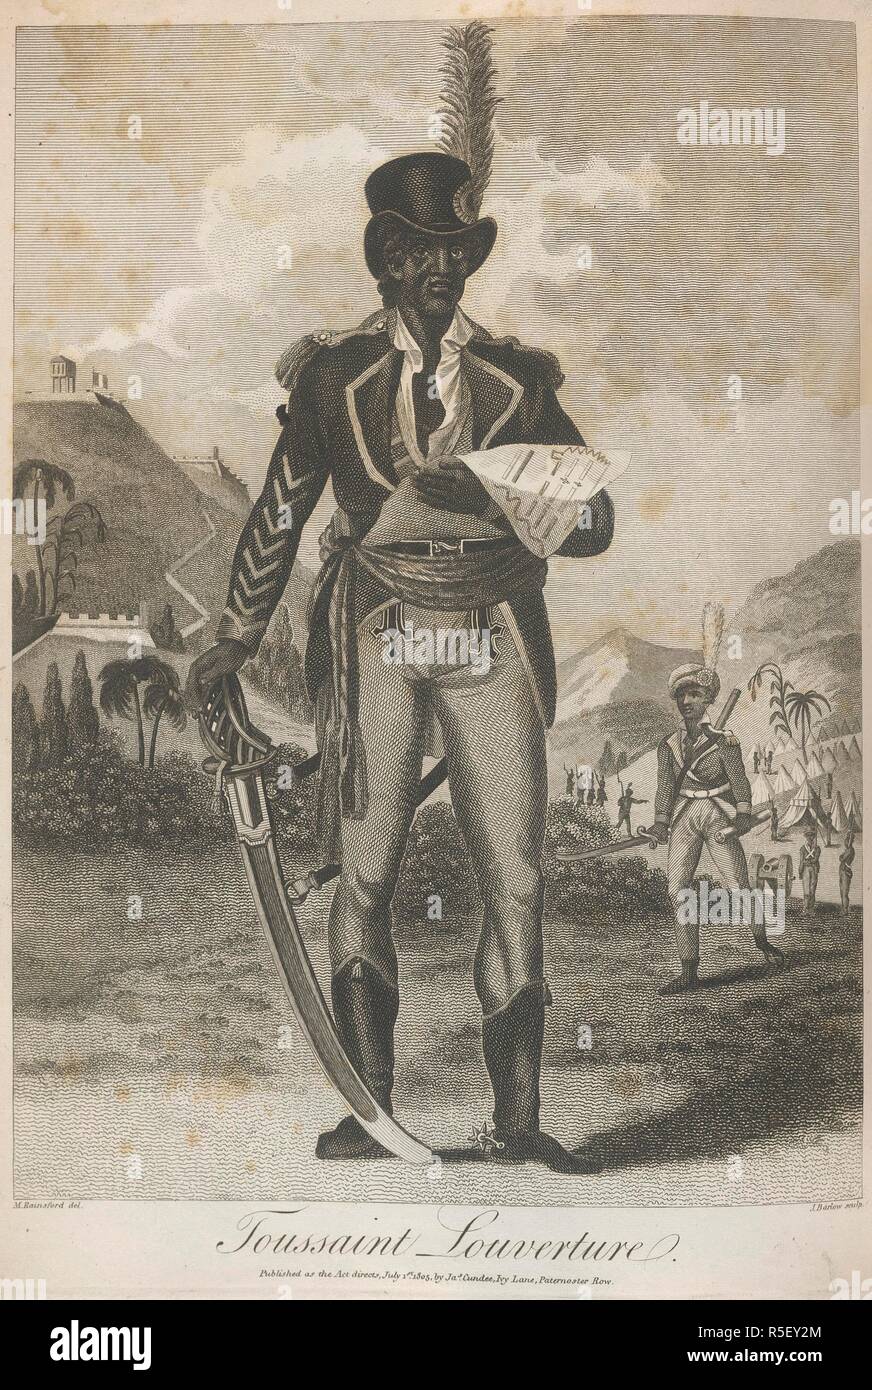 Toussaint Louverture. (1746-1803). Haitian revolutionary leader. An historical account of the black empire of Hayti. London, 1805. Toussaint Louverture (1746-1803). Haitian revolutionary leader. Born a slave, he became a general in the French army but after driving out the British and Spanish expeditions, he took control of the island. Napoleon sent an expedition to restore restore control and the re-establishment of slavery. He was treacherously seized from a meeting, imprisoned and died of neglect in prison. Portrait. Image taken from An historical account of the black empire of Hayti ( Hait Stock Photo